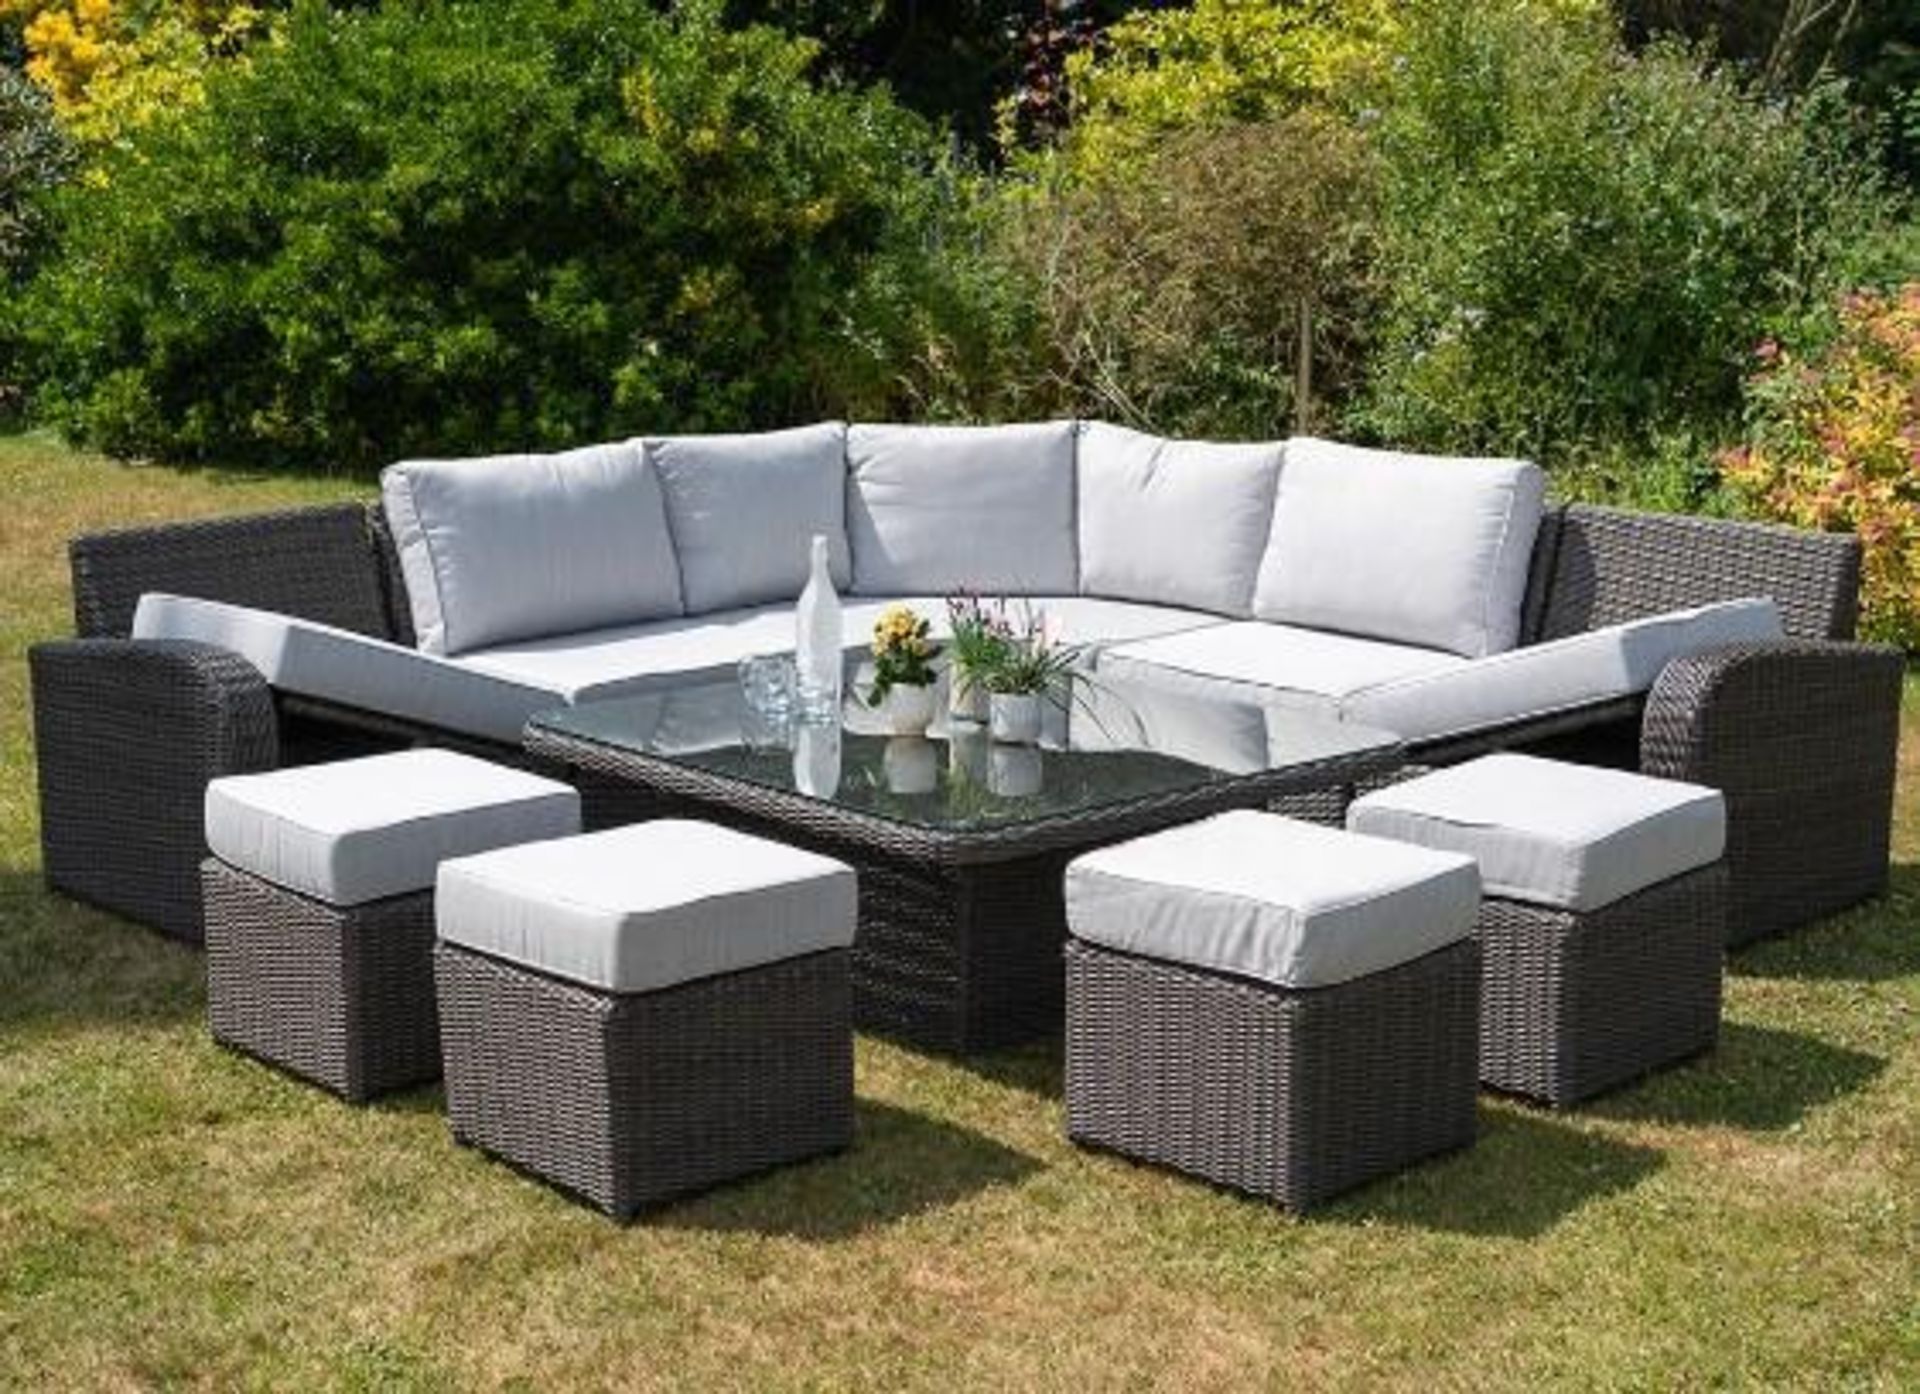 Brand New Moda Furniture, 10 Seater Outdoor Rise and Fall Table Dining Set in Natural with Cream - Image 2 of 12